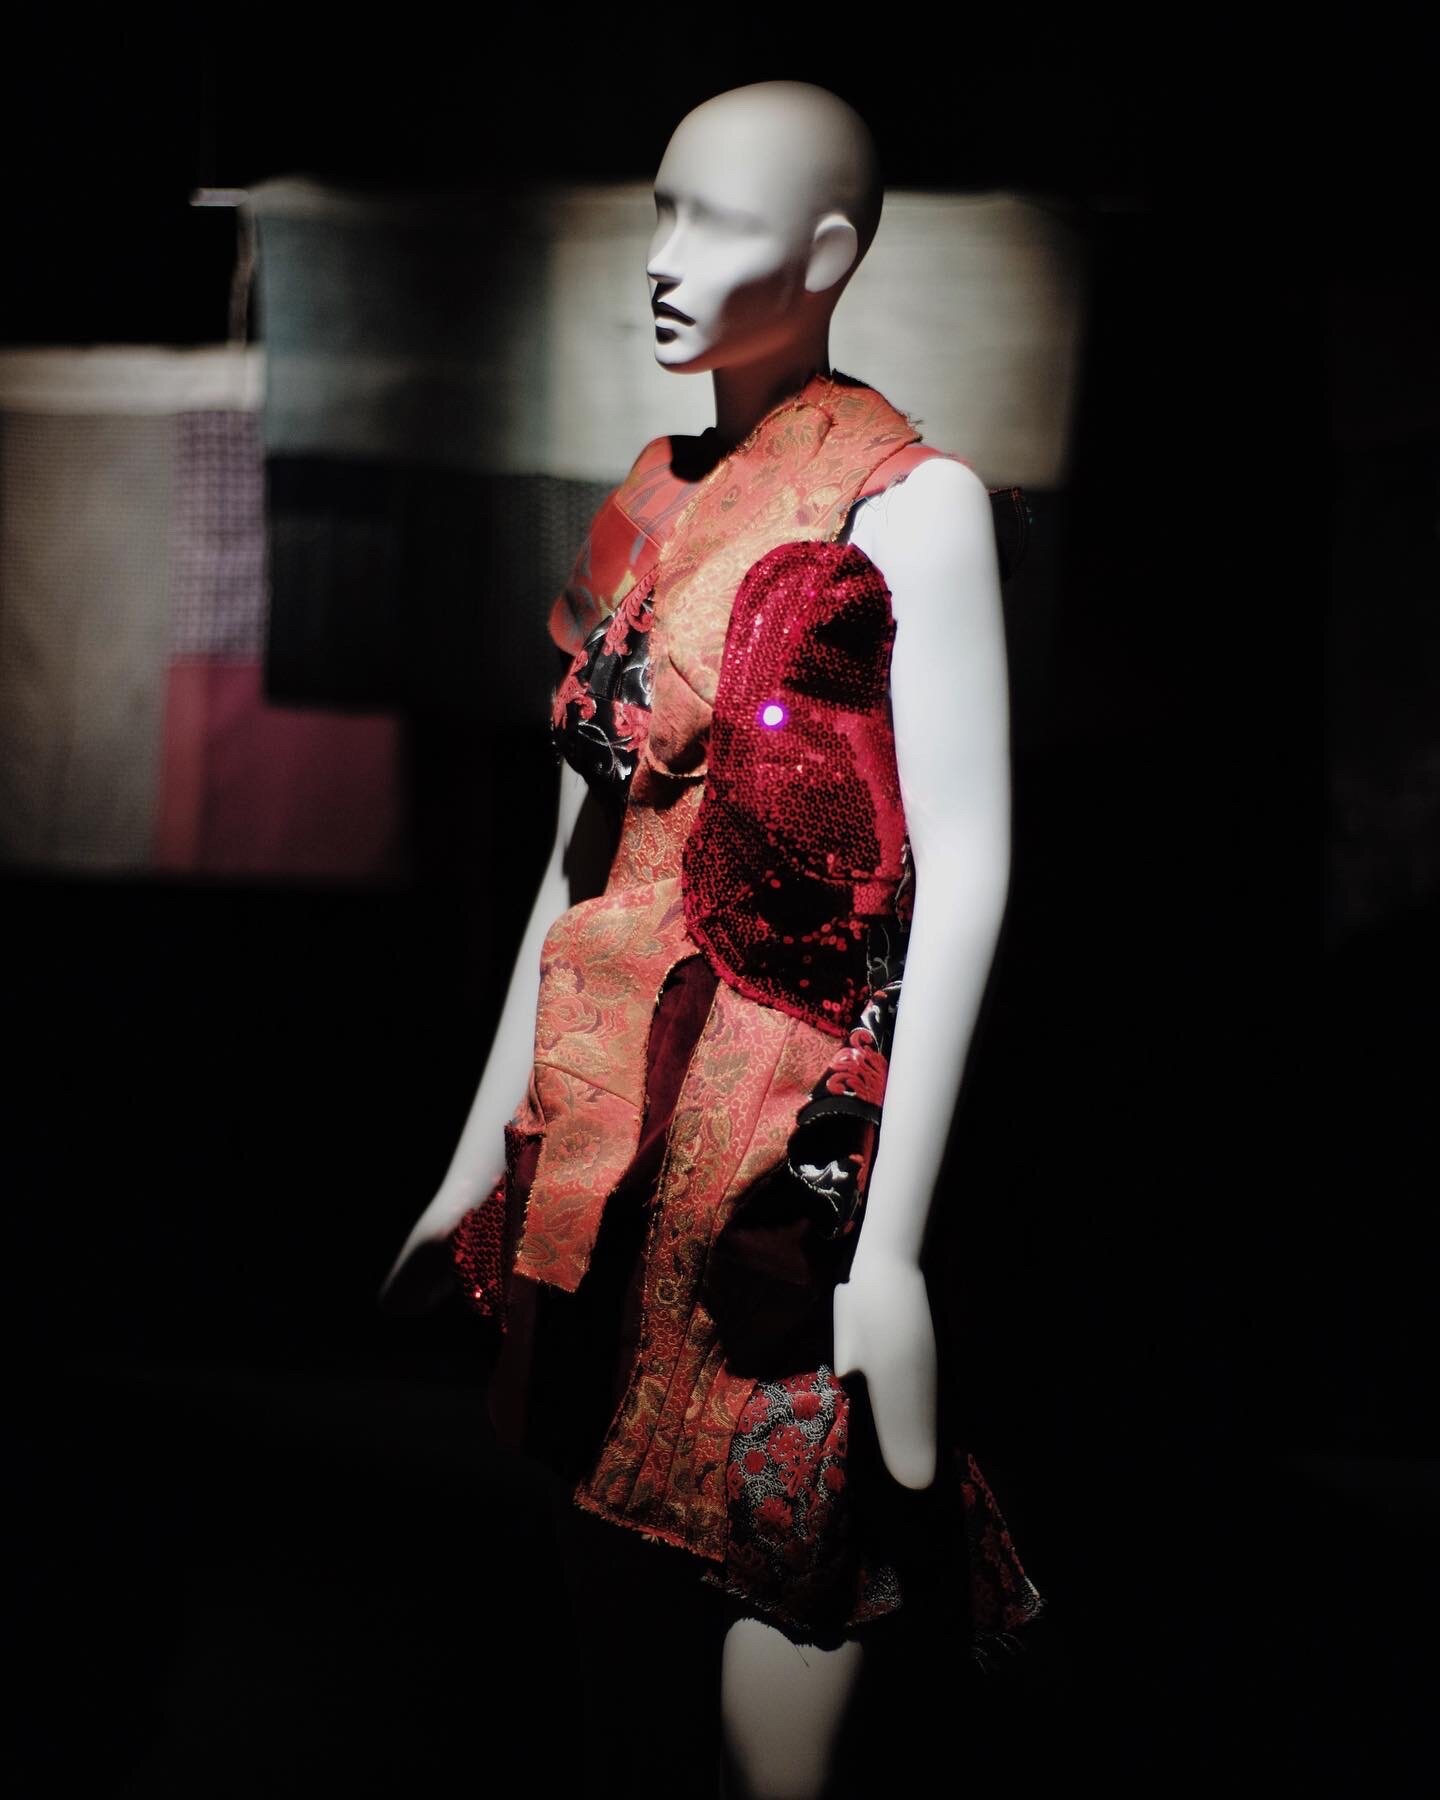  Figure 7. Rei Kawakubo/Comme des Garçons dress from  Adult Delinquent  collection, S/S 2010. The Mary Baskett Collection. Photograph by Alina Osokina. 